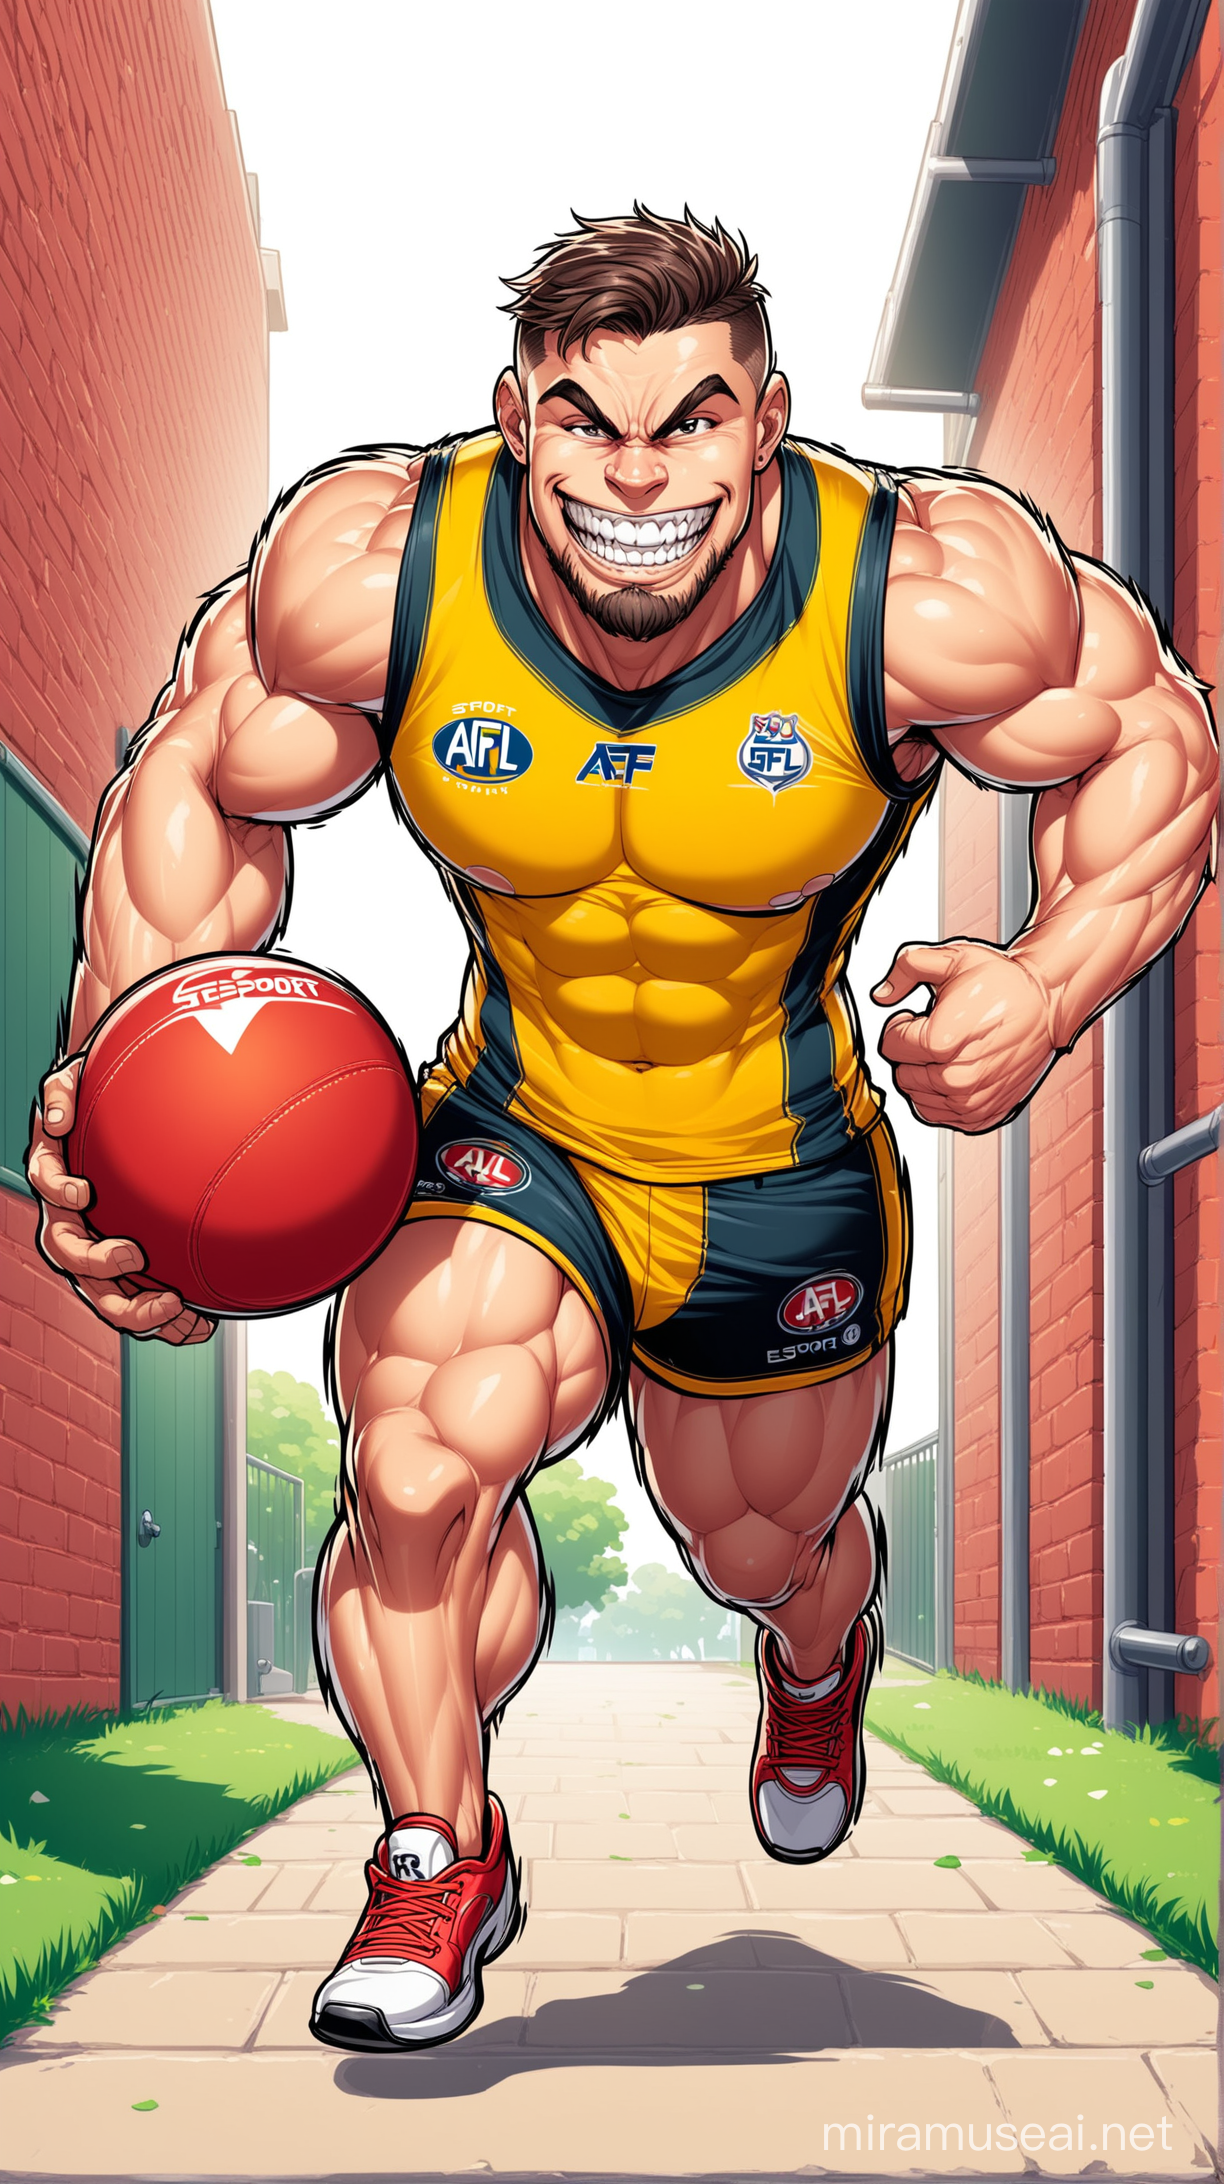 muscly man, AFL player, cartoonish, big teeth, big grin, distended jaw, stoop down running with a ball, full body shot, esport mascot logo